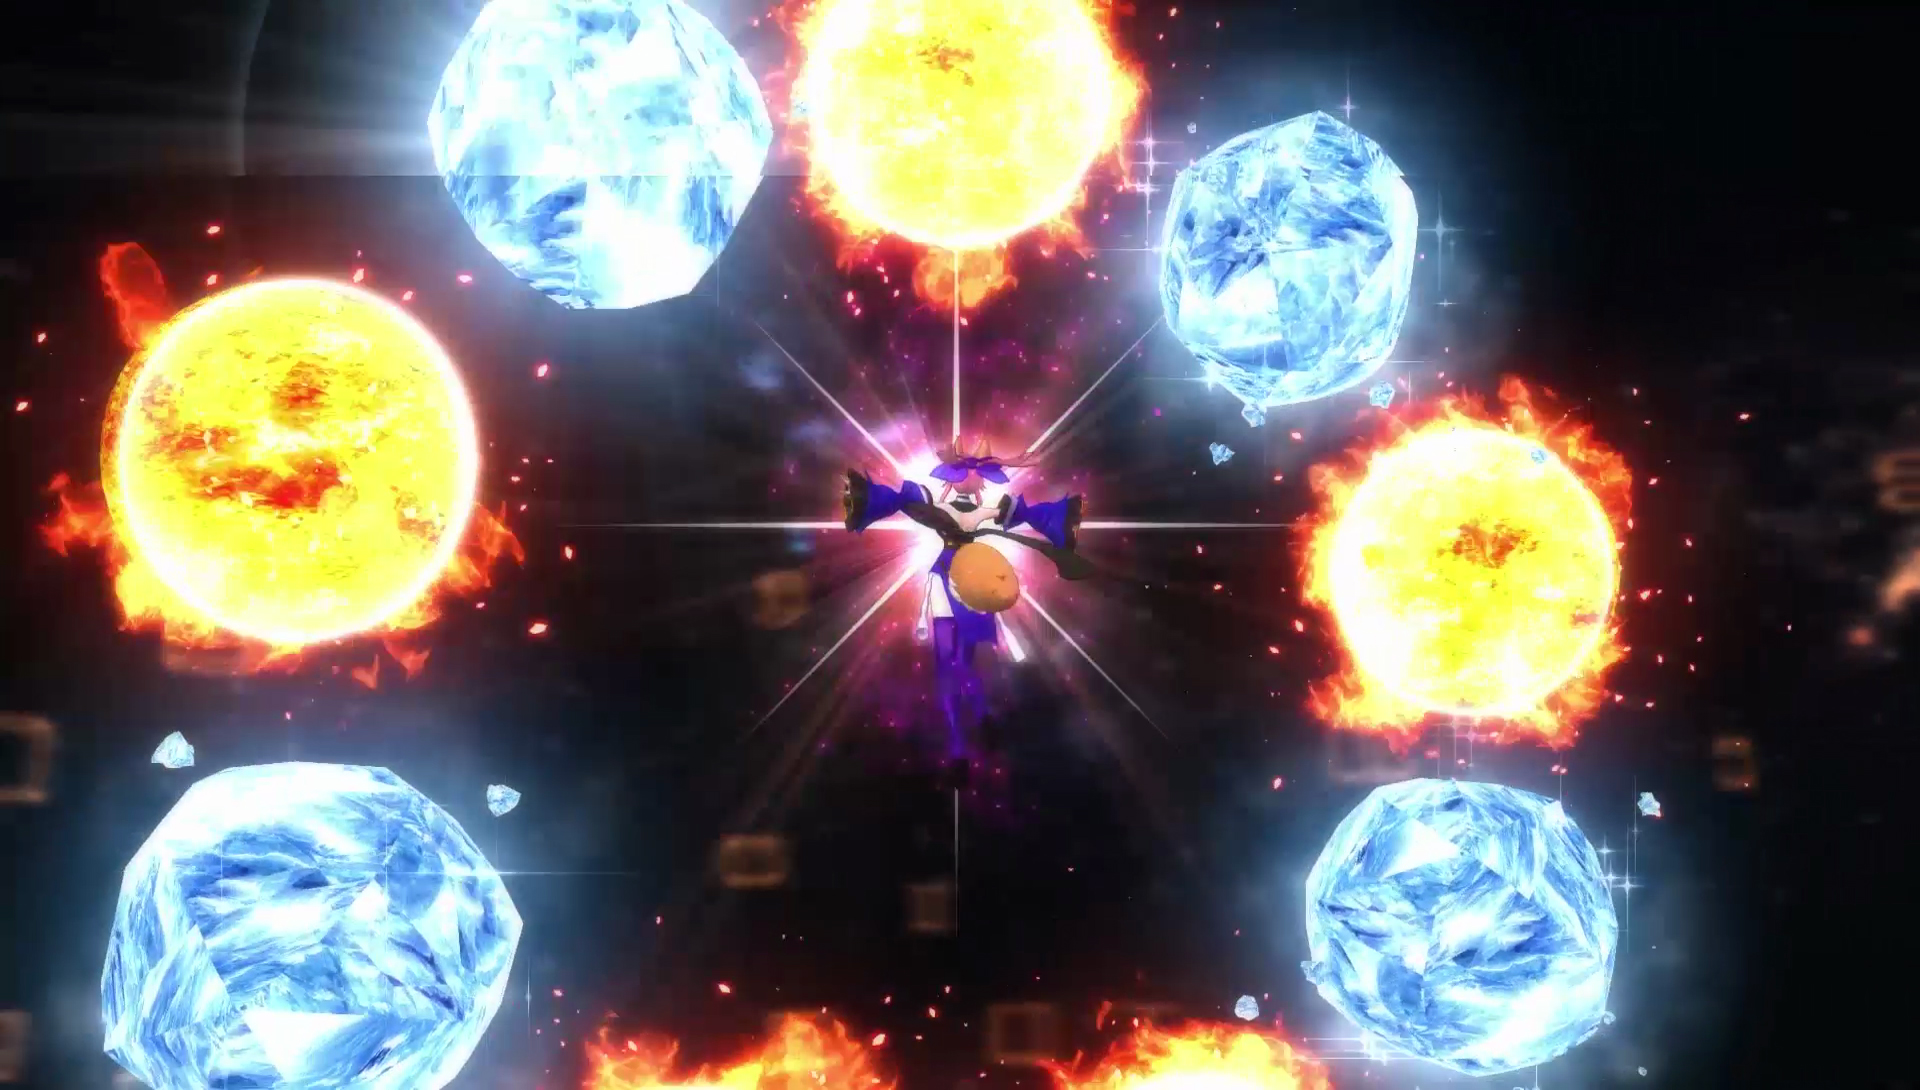 Fate-extella-the-umbral-star e3 2016 screen 17